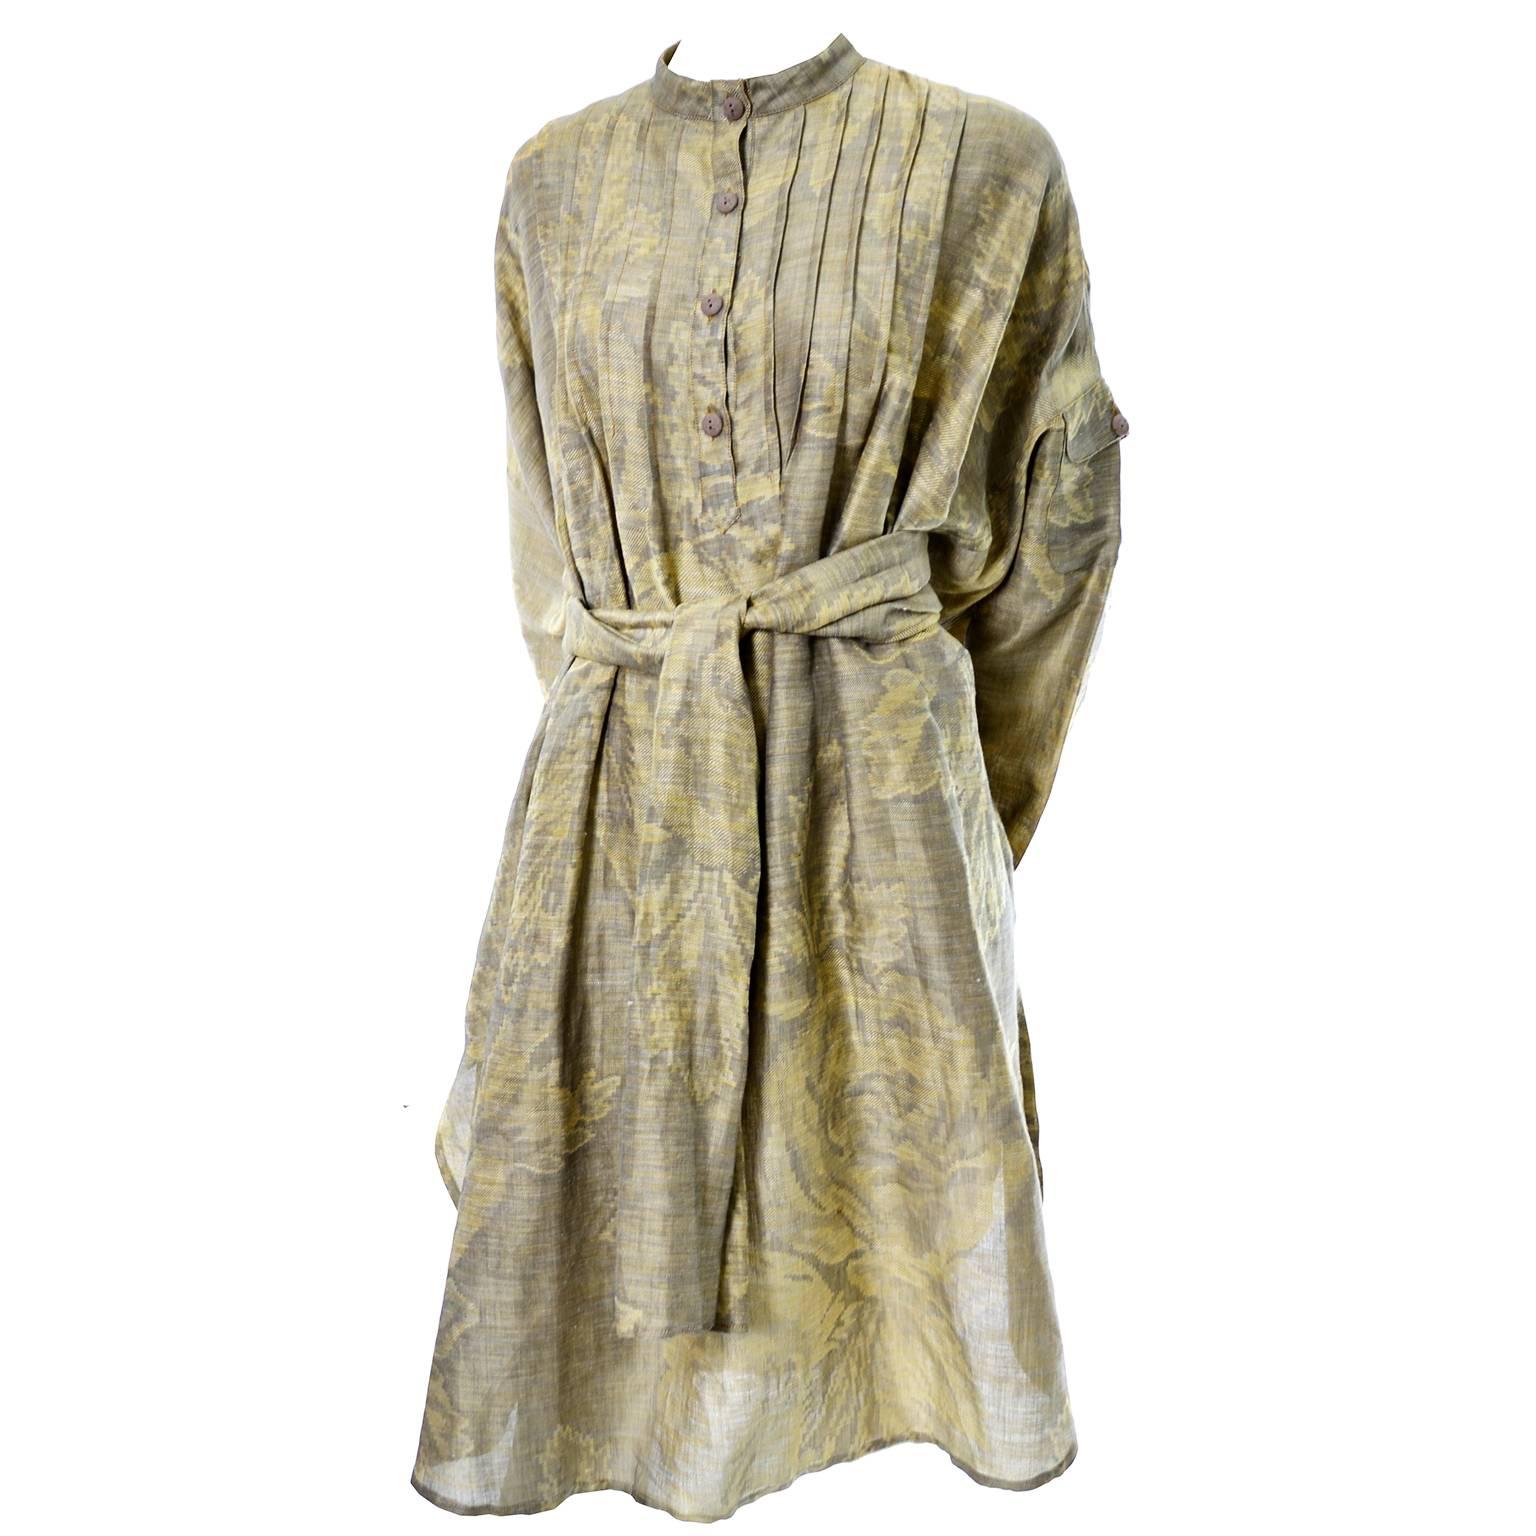 This outstanding vintage Ferragamo tunic is Japanese inspired and comes from an amazing woman who worked for many years for the exclusive Houston Couture boutique, Isabell Gerhart.  She was very close with Isabell herself, and her clothing